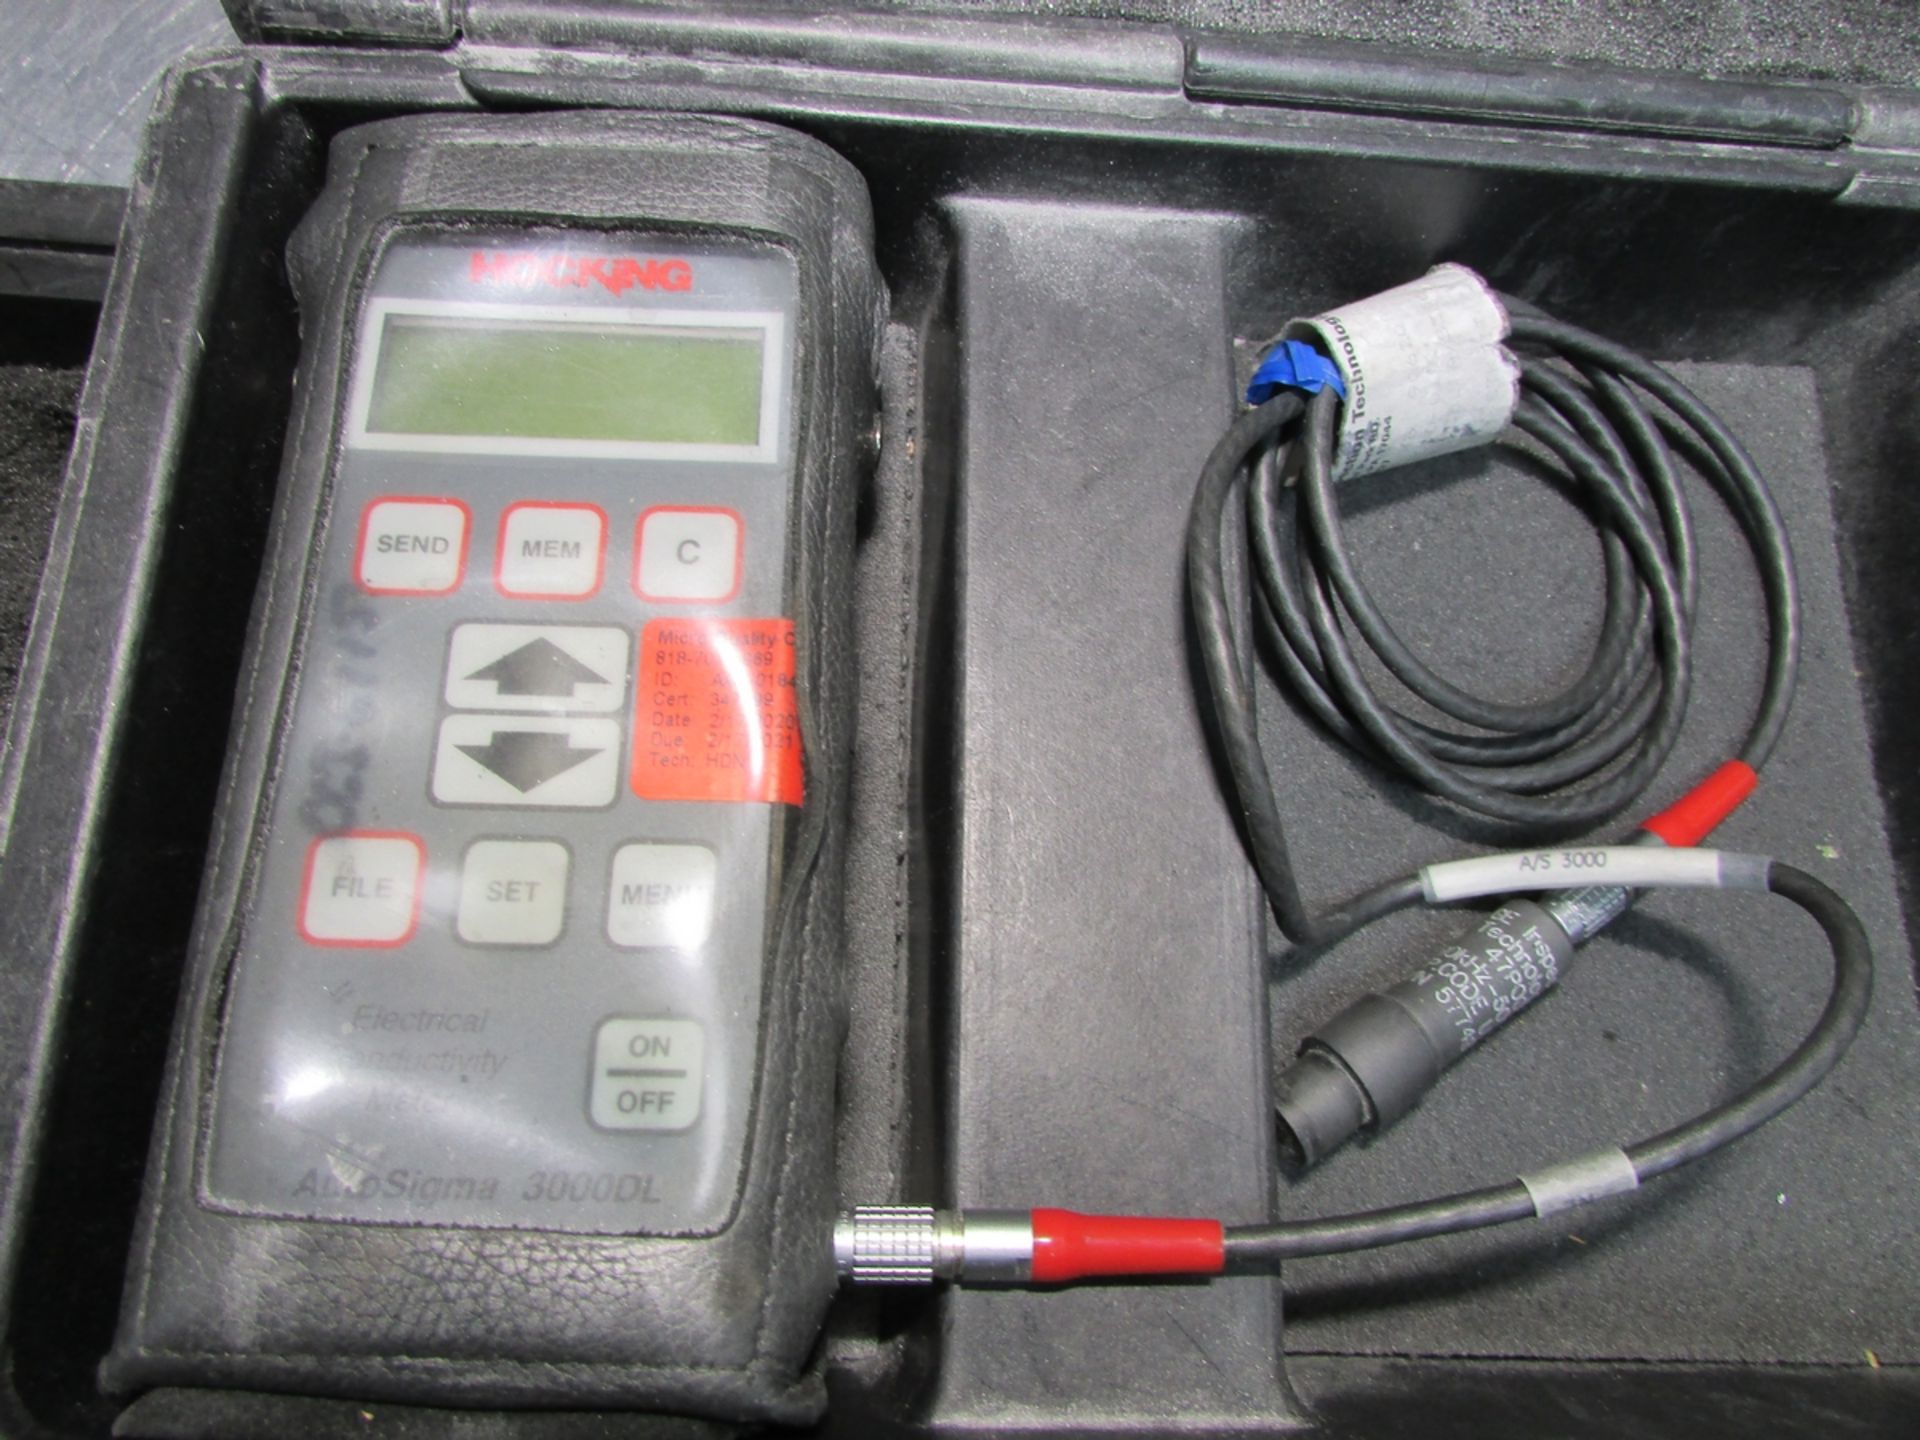 LOT - (3) HOCKING ELECTRICAL CONDUCTIVITY METERS, MODEL AUTOSIGMA 3000DL - Image 4 of 5